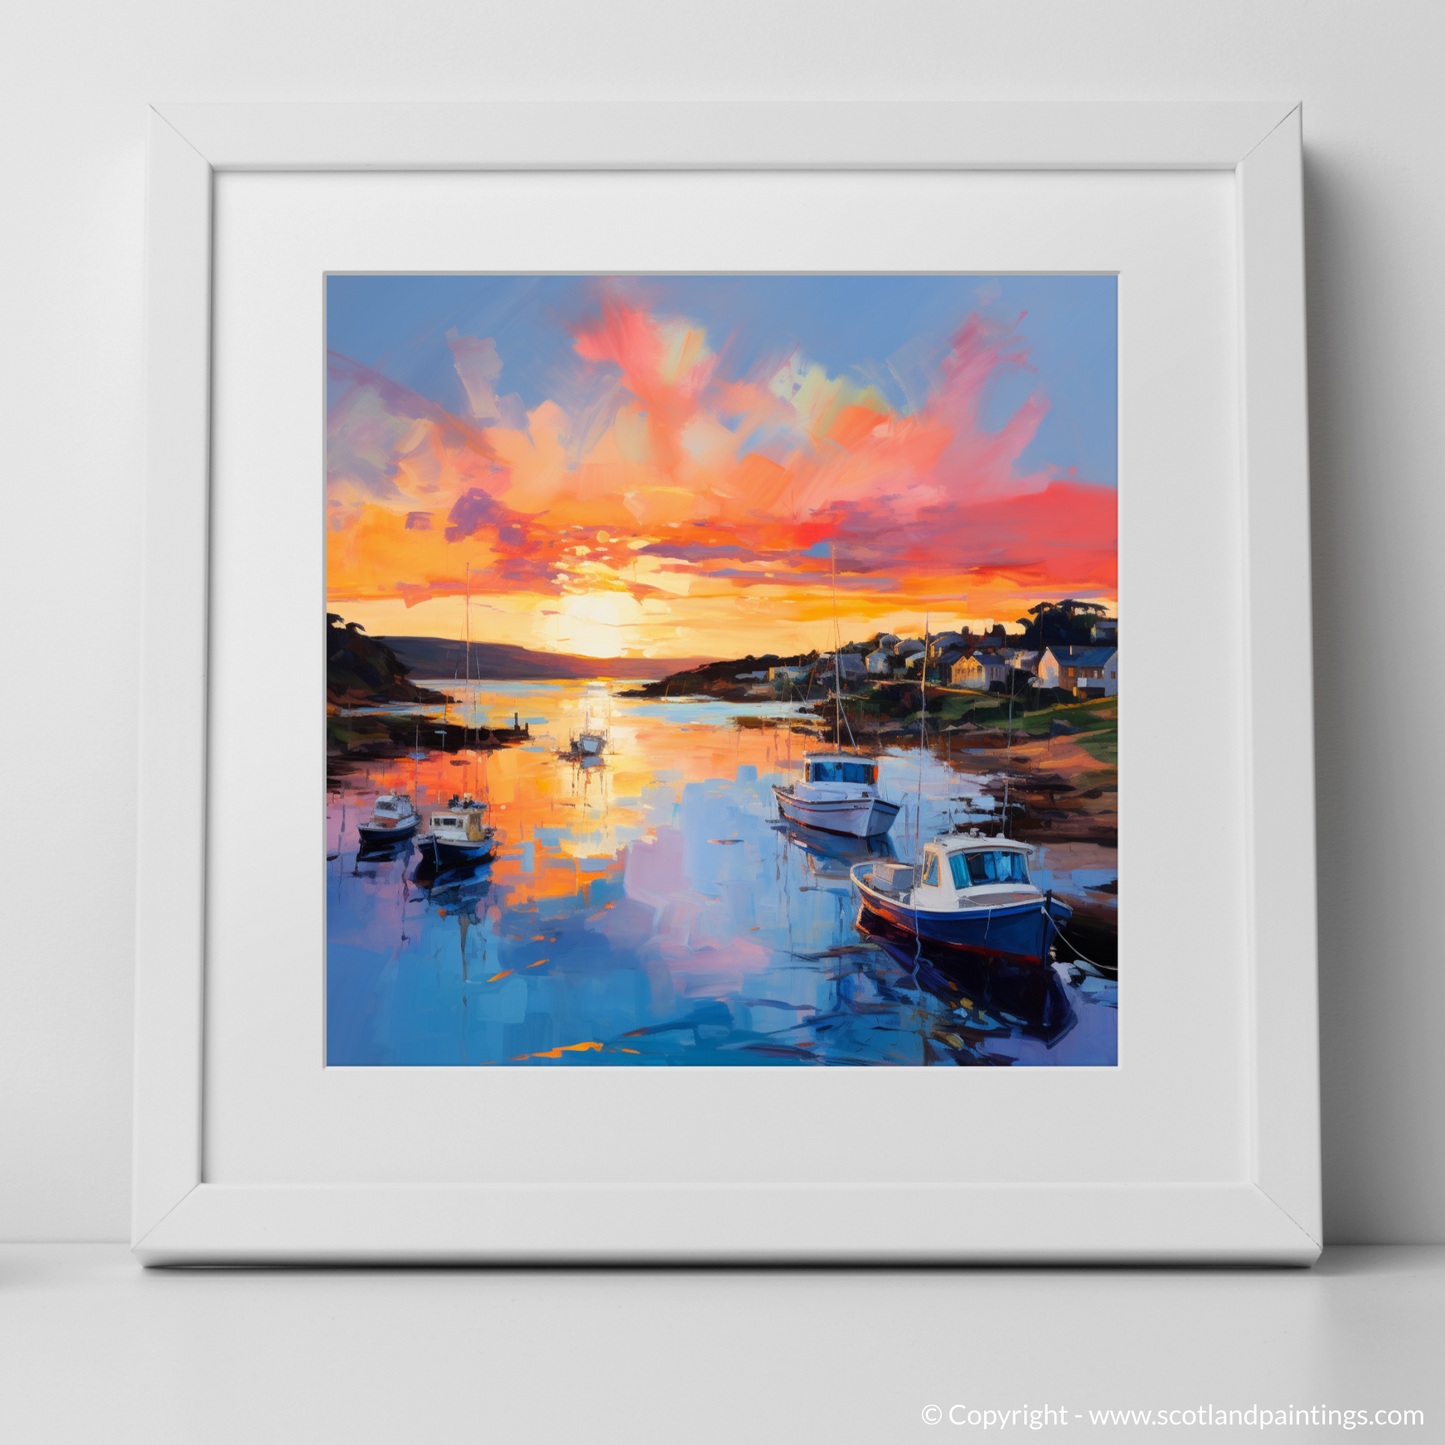 Painting and Art Print of Cullen Harbour at sunset. Sunset Serenity at Cullen Harbour.